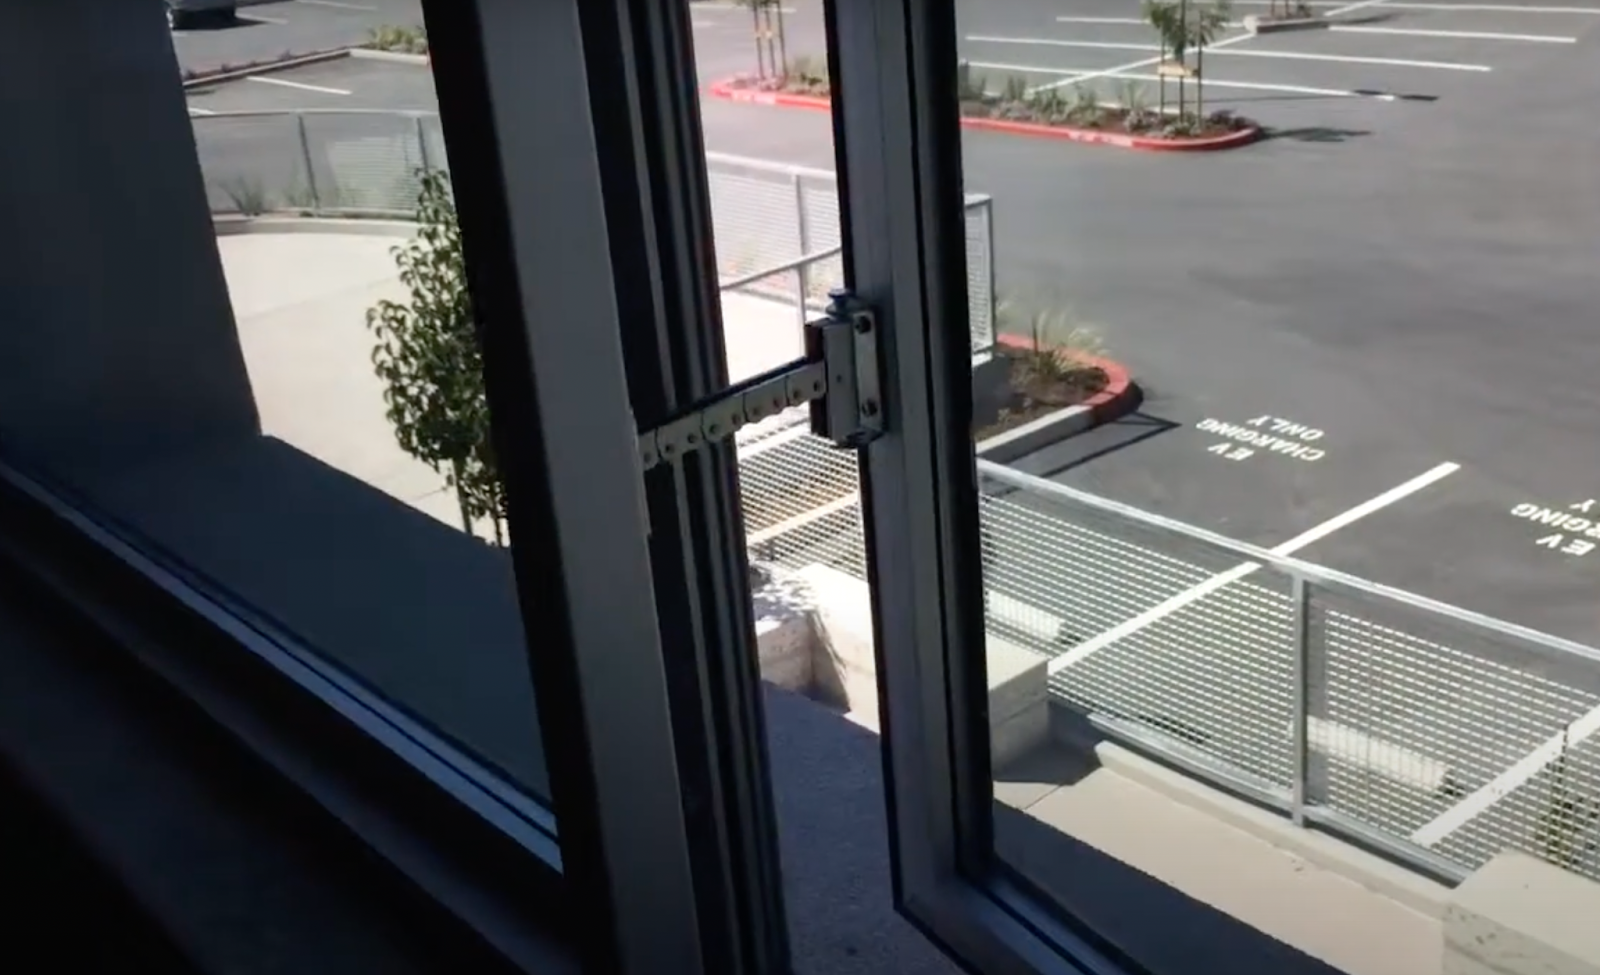 This office building room has a window overlooking a parking lot.